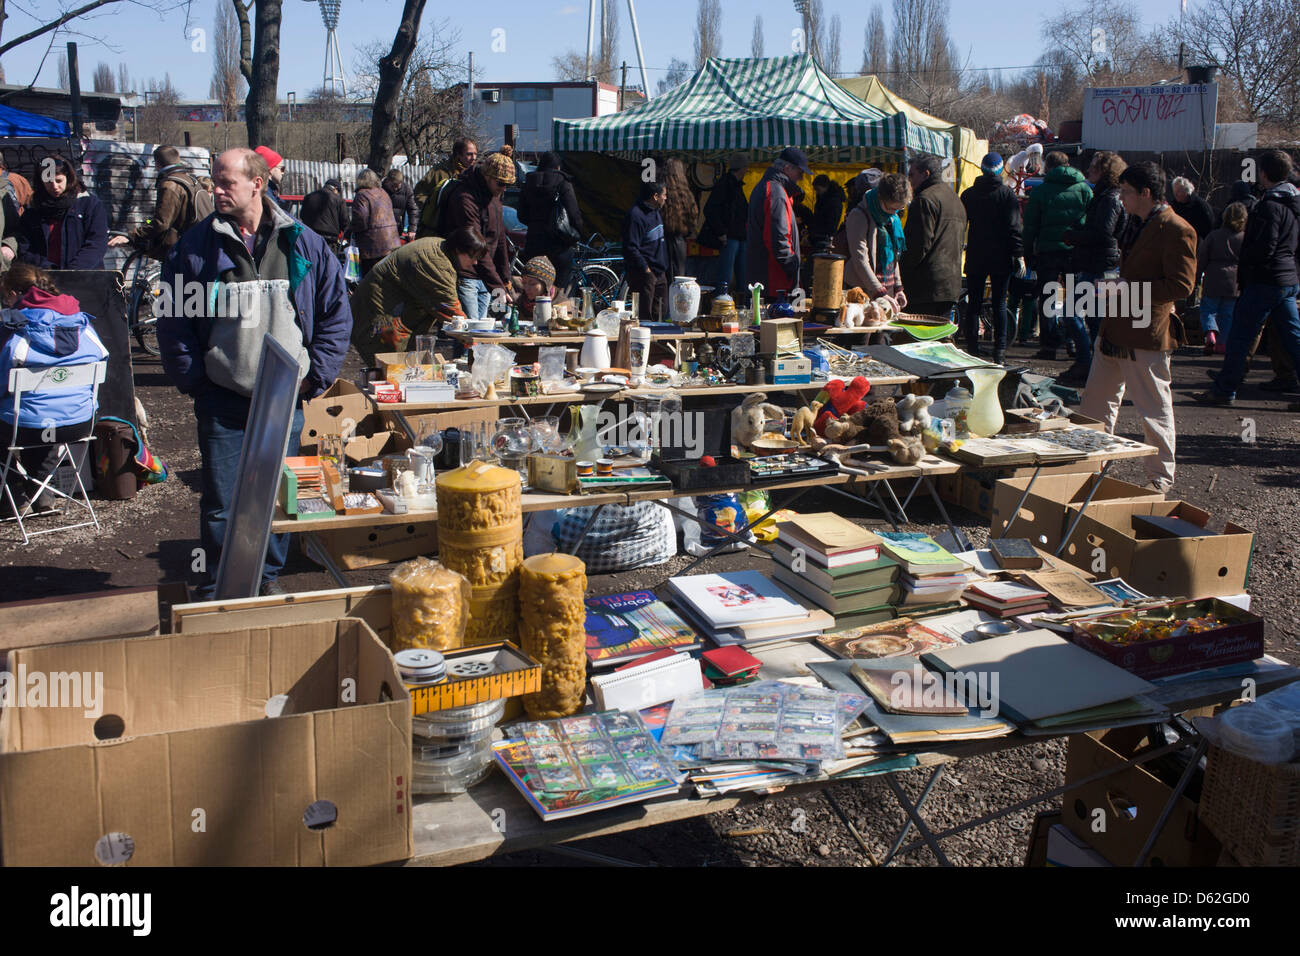 Bric-a-brac and old possessions being sold at a giant market in Mauerpark - an open space on the site of the old Berlin wall, the former border between Communist East and West Berlin during the Cold War. Stock Photo